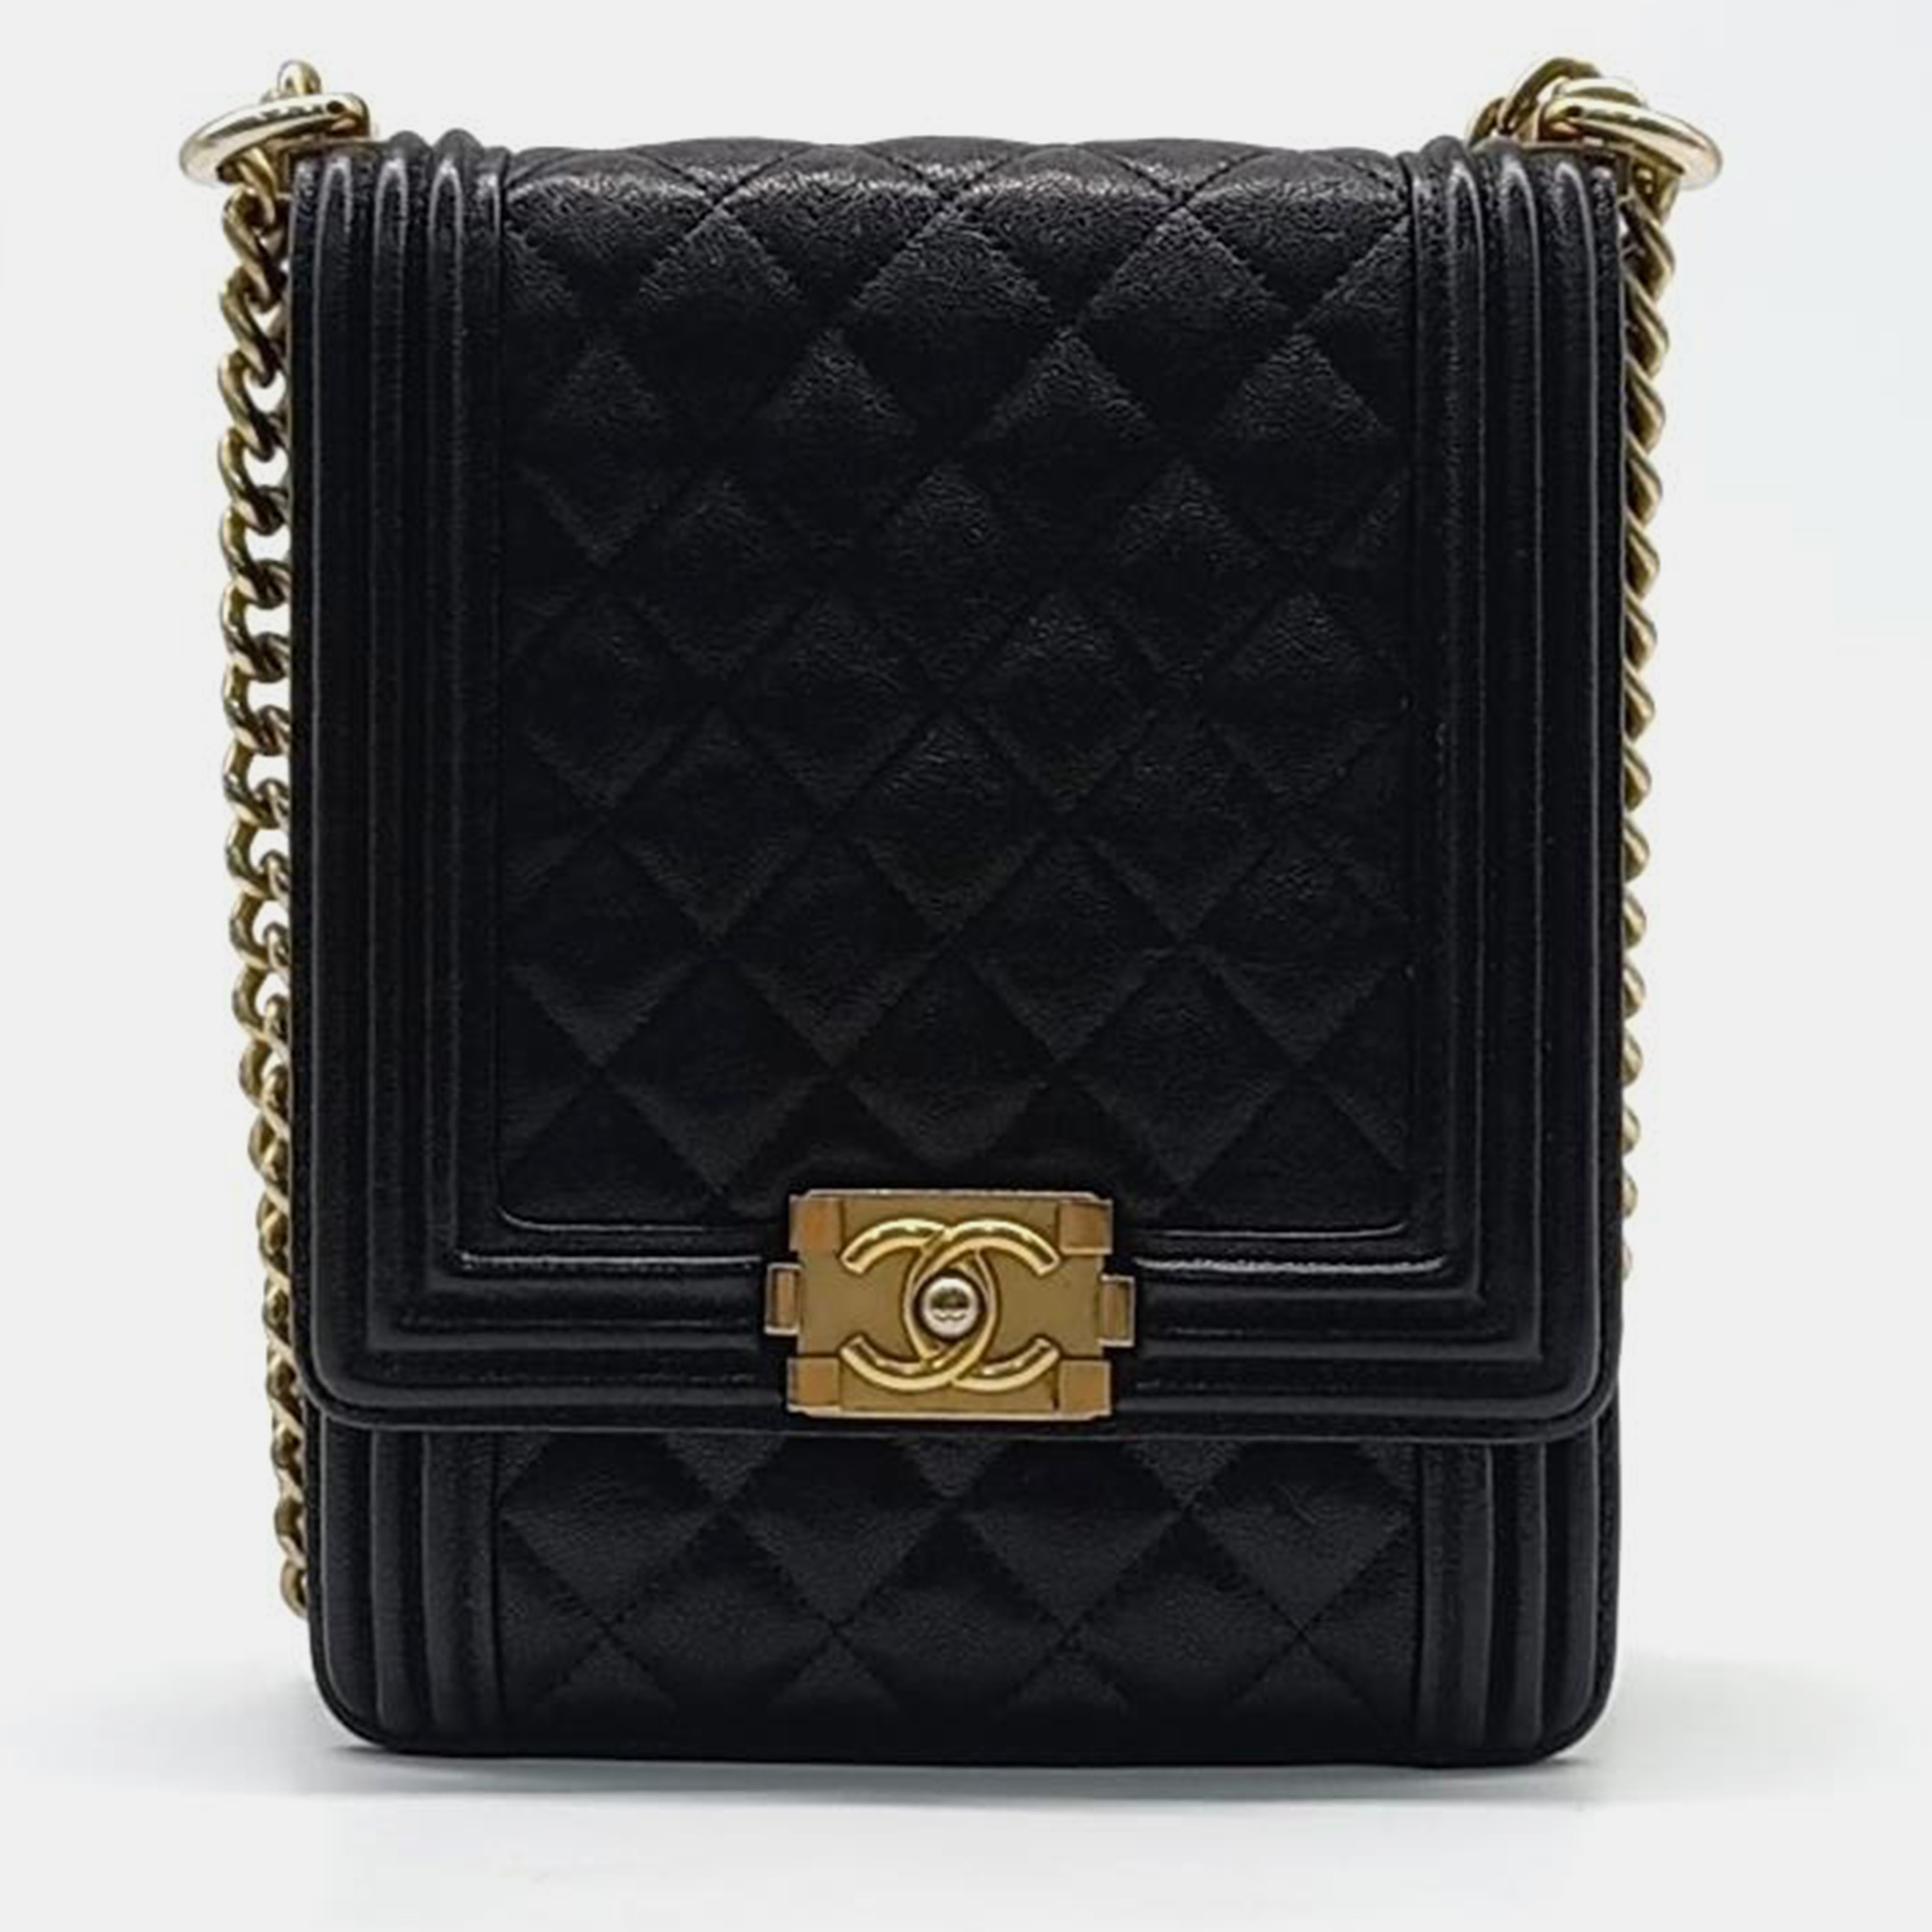 Chanel black caviar leather chic pearls flap bag